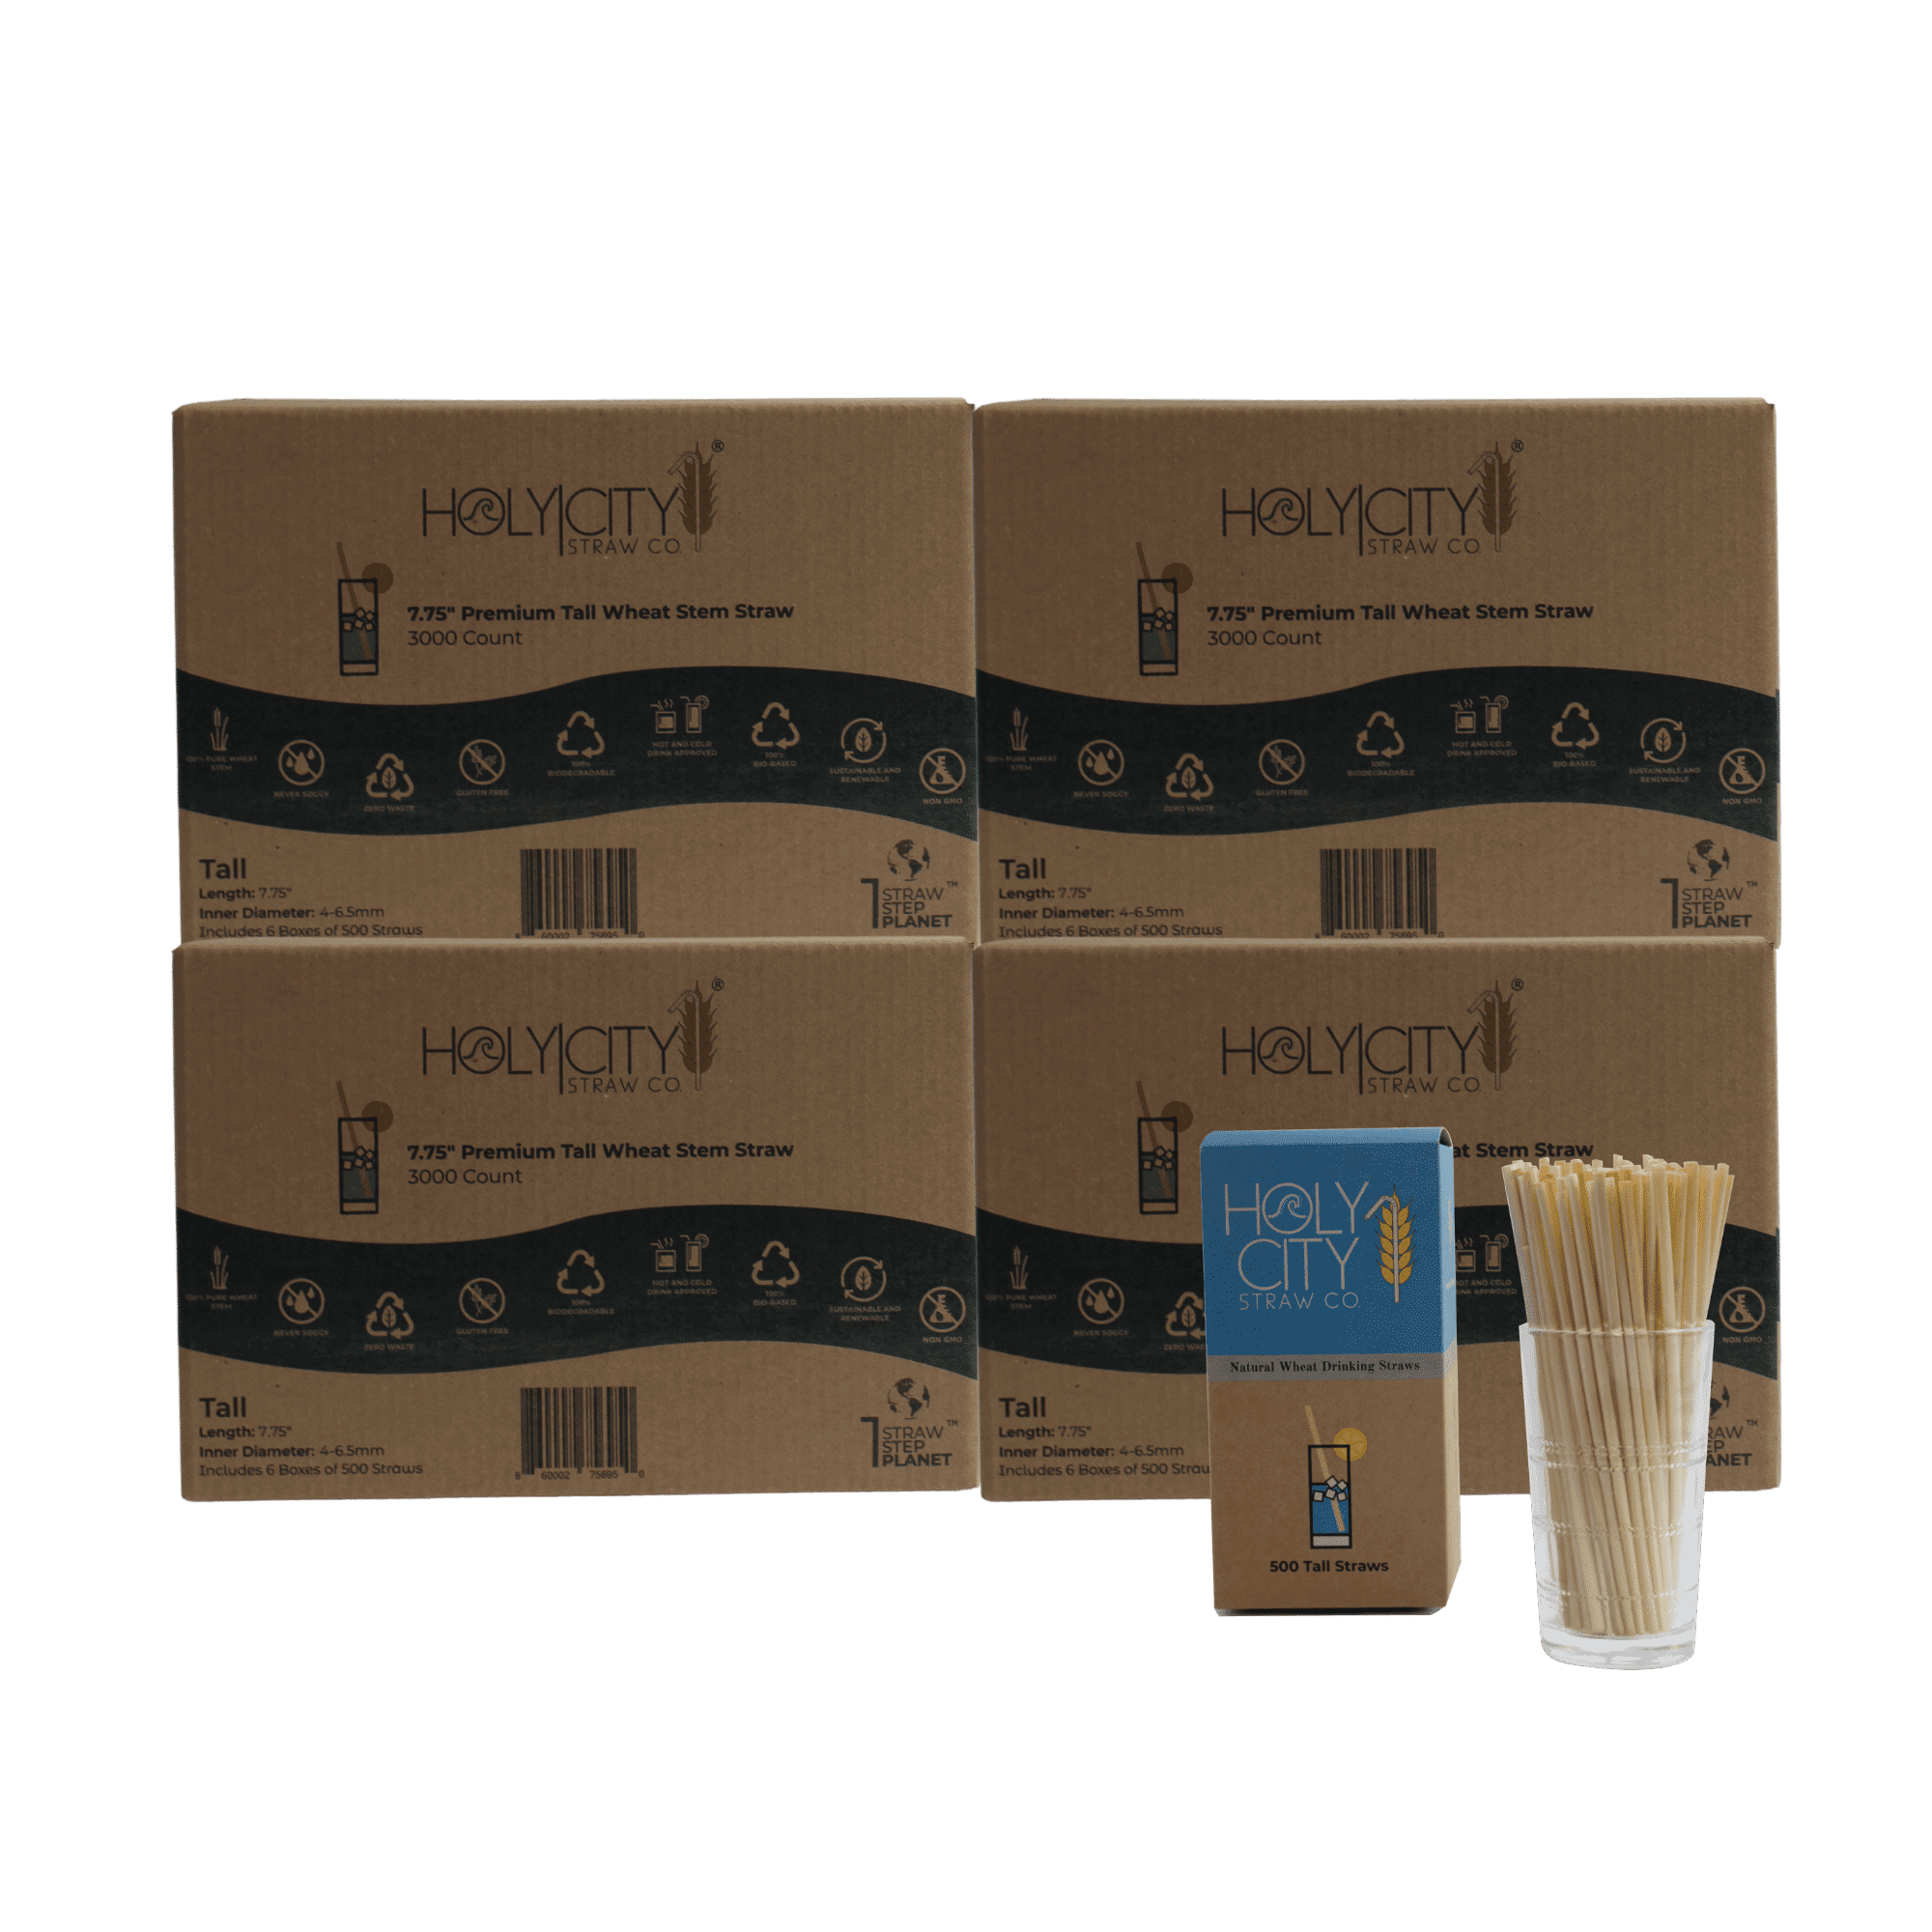 12000 count super case containing 24 boxes of 500 count boxes of Holy City Tall Wheat Straws